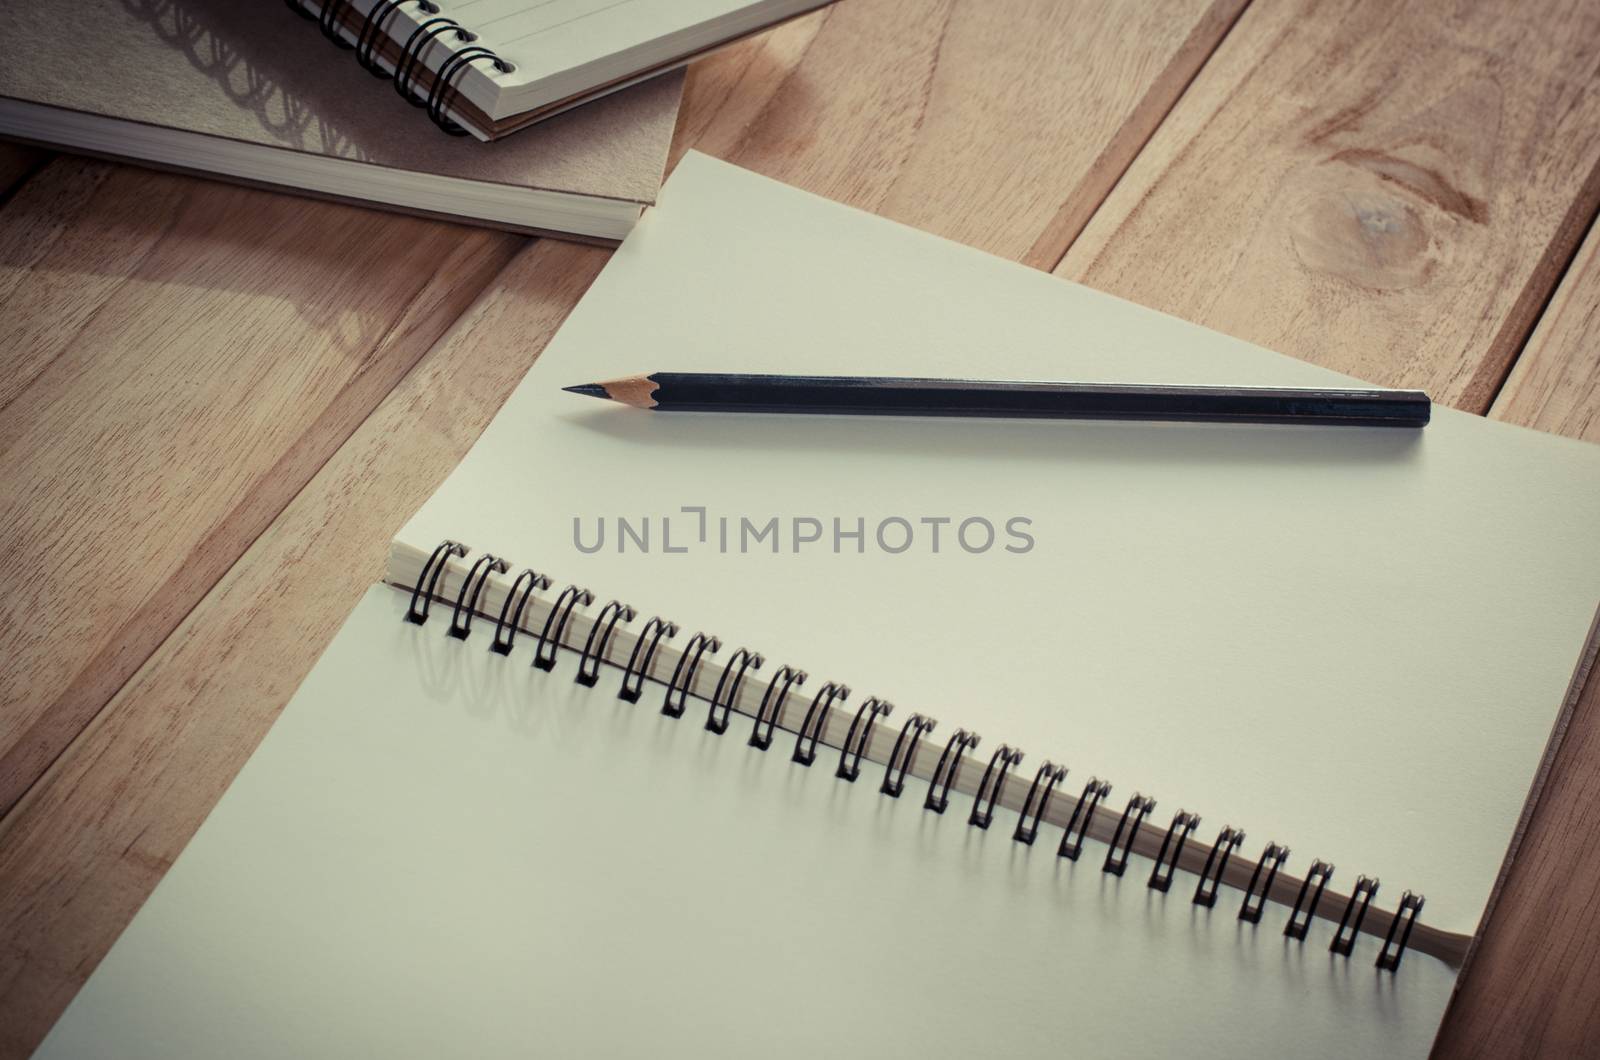 blank notebook with pencil on wooden table - still life